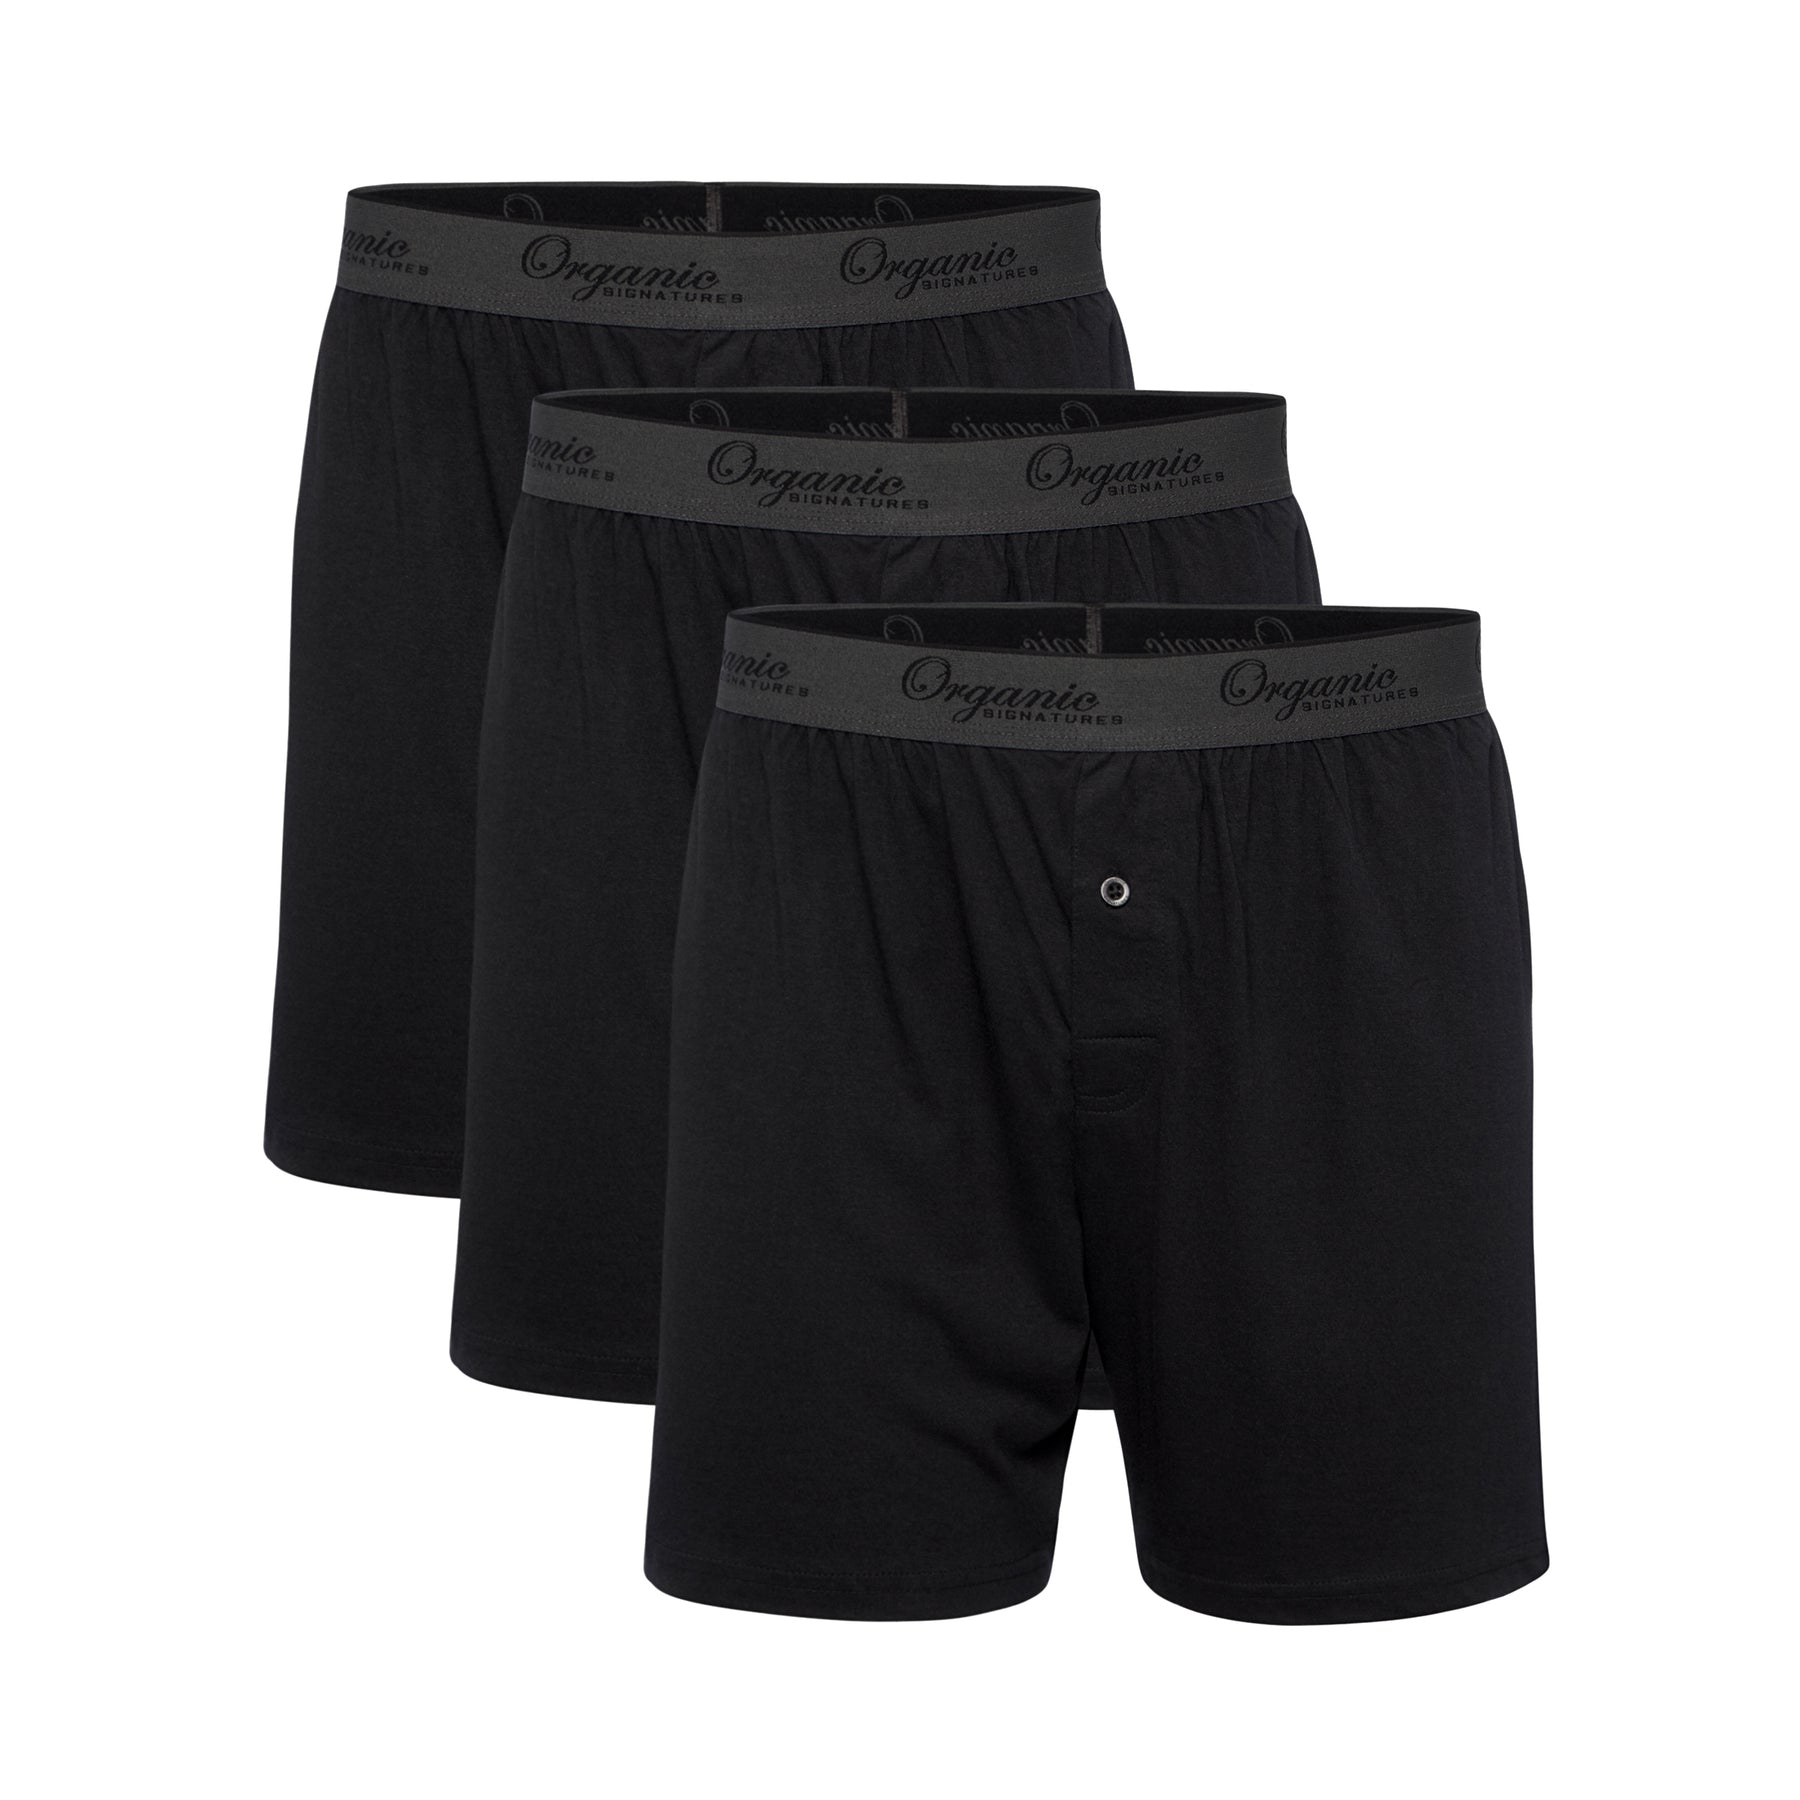 Bamboo Underwear, Men's Cool, Breathable Bamboo Blended Boxers - Black –  Organic Signatures